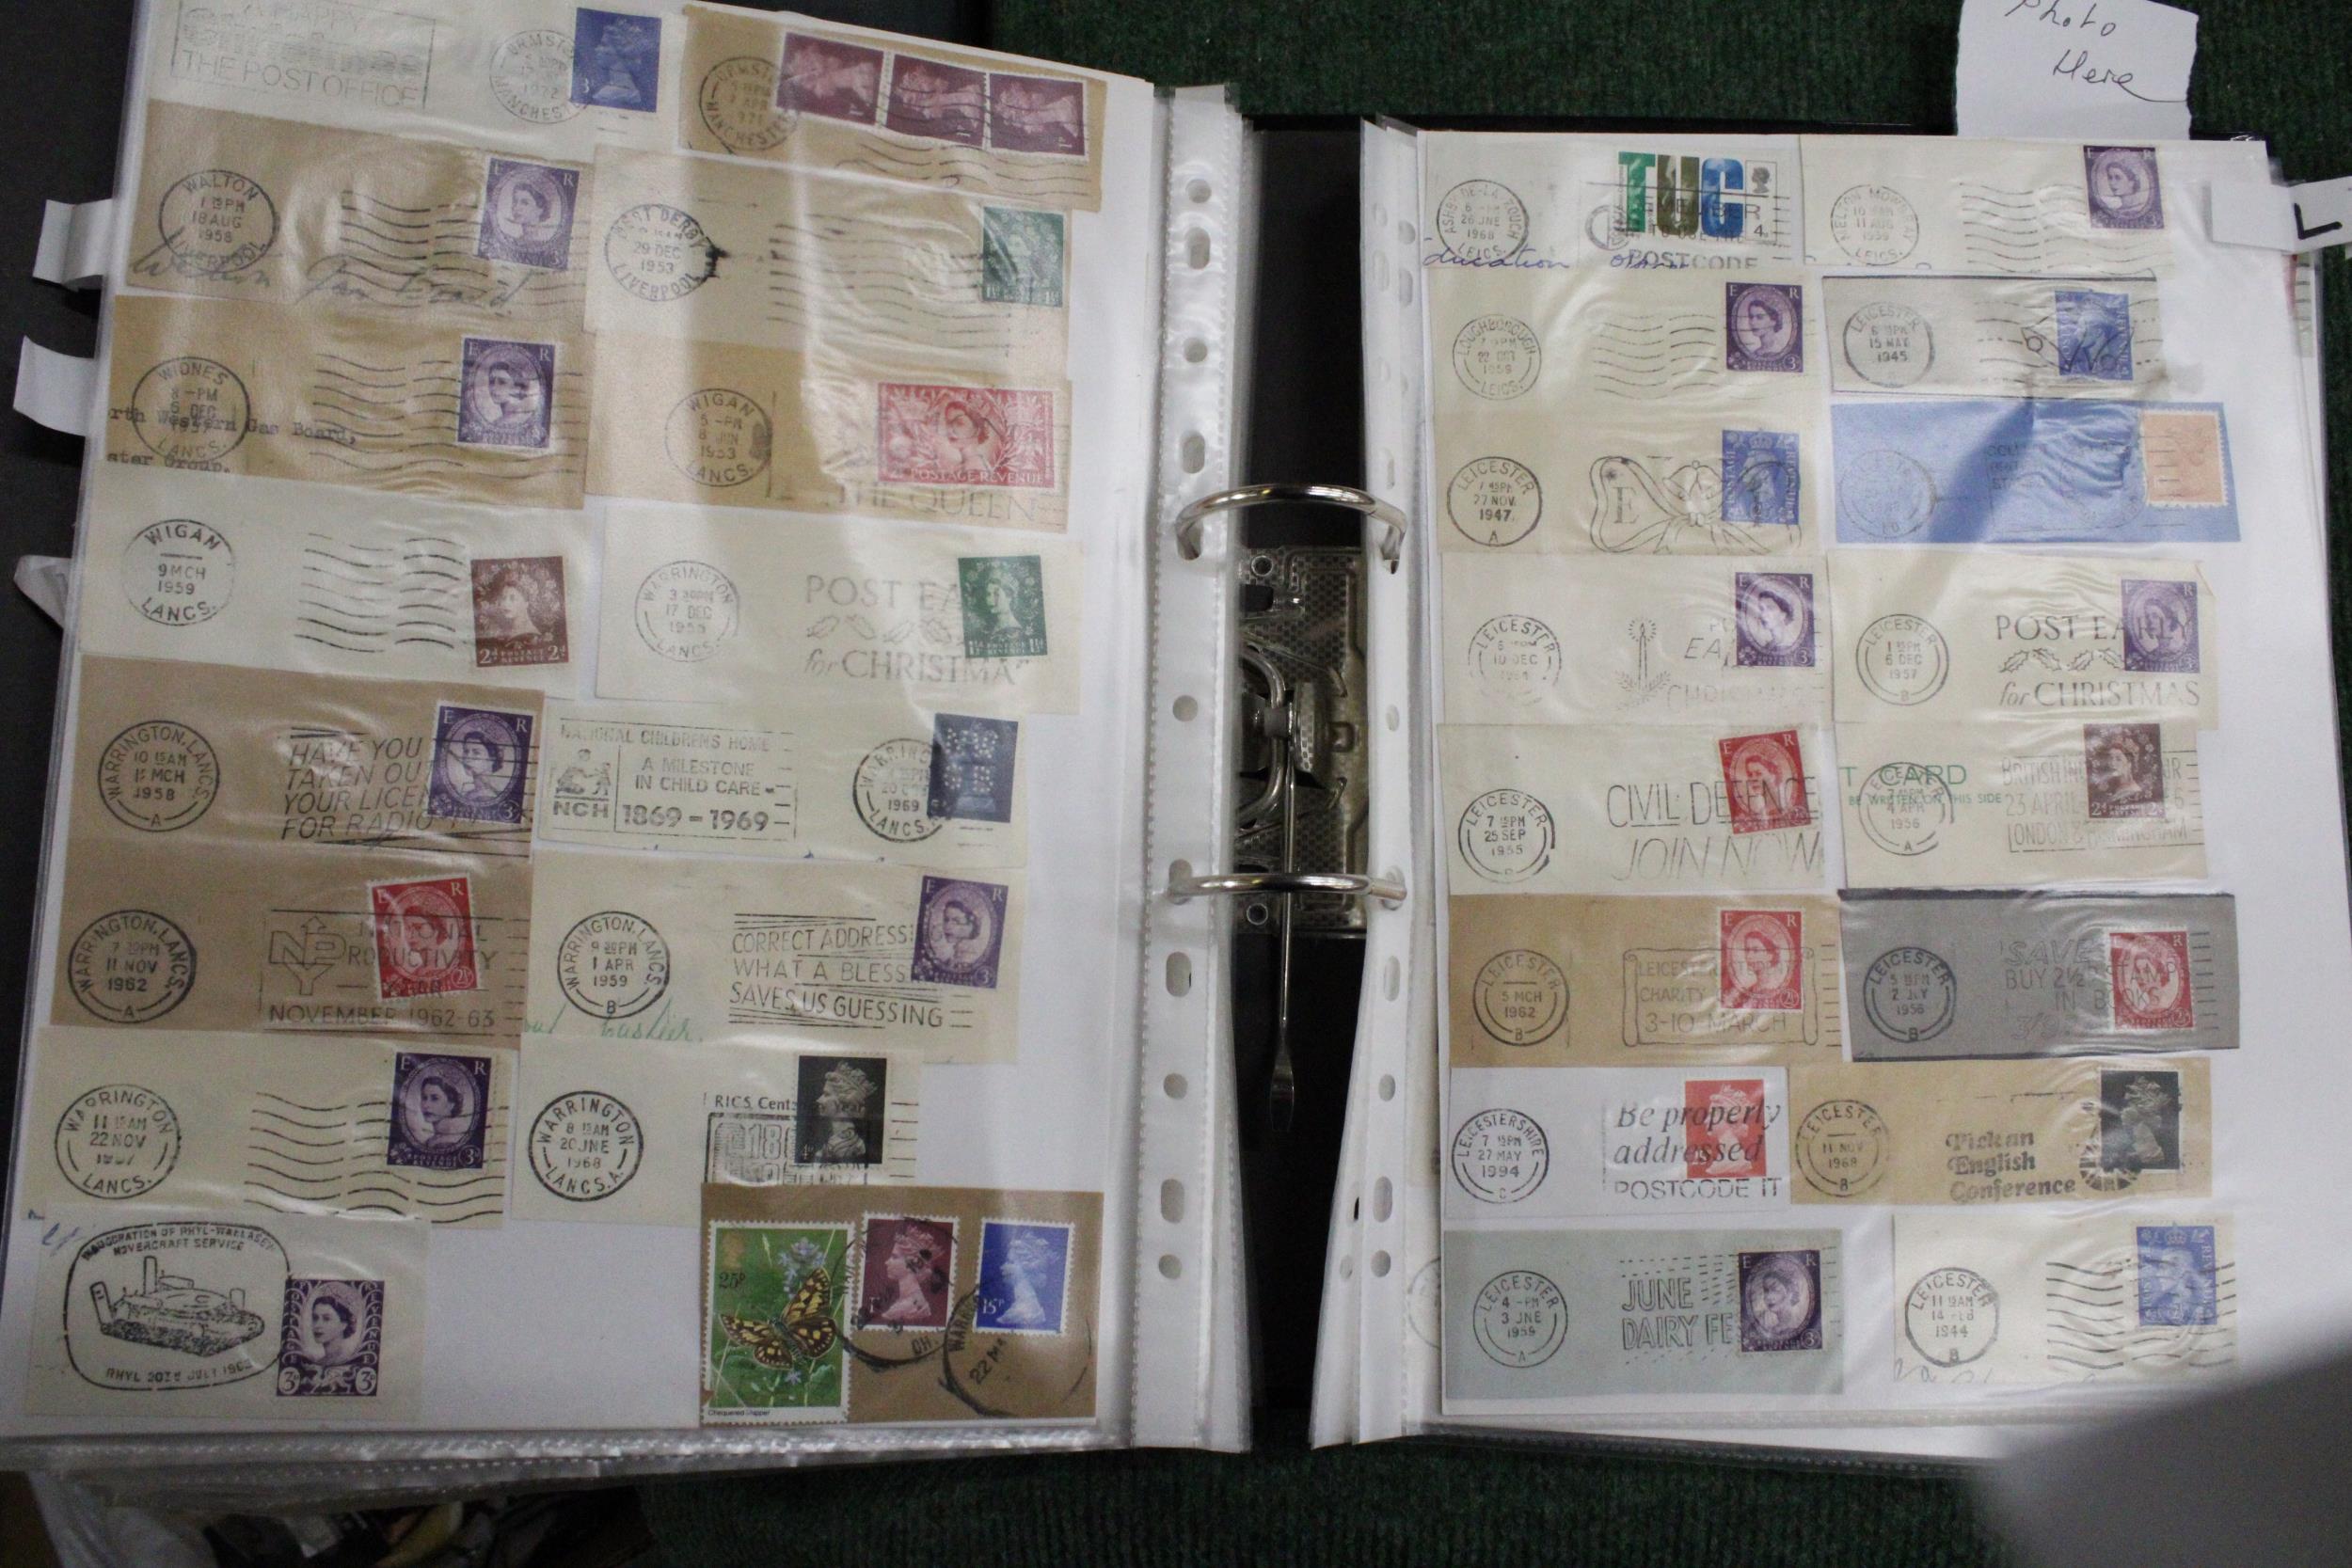 AN ALBUM CONTAINING A COLLECTION OF POSTAL HISTORY STAMPS - Image 4 of 5